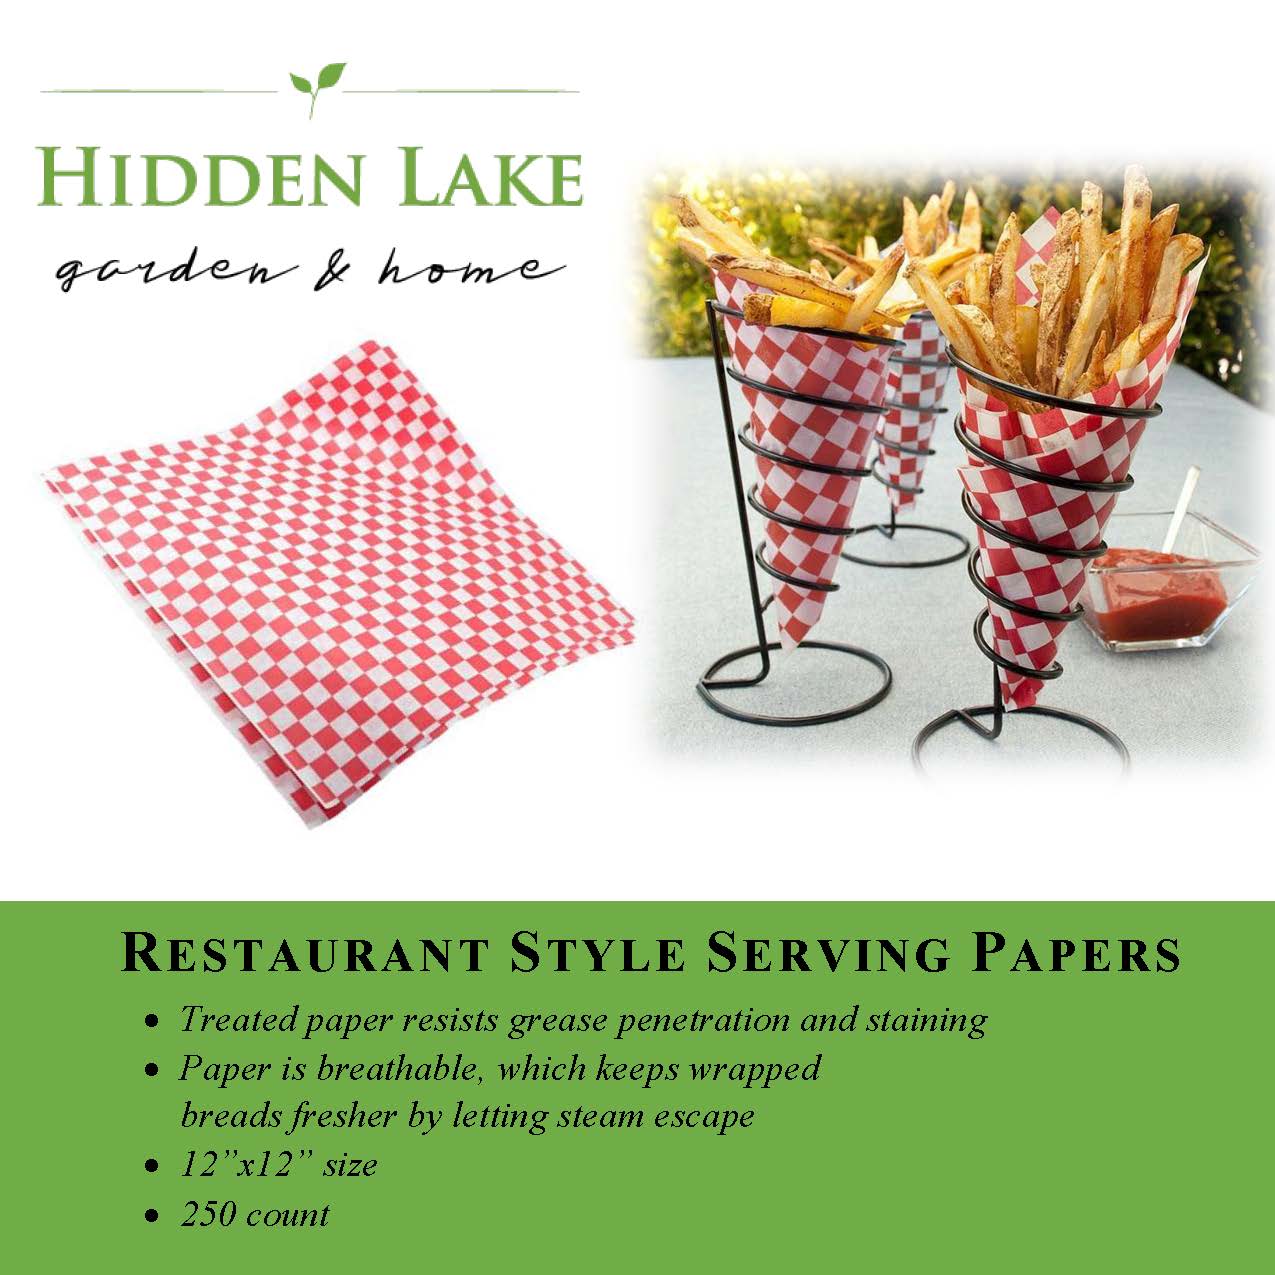 A photograph of the Label of the Red and White restaurant style serving papers .